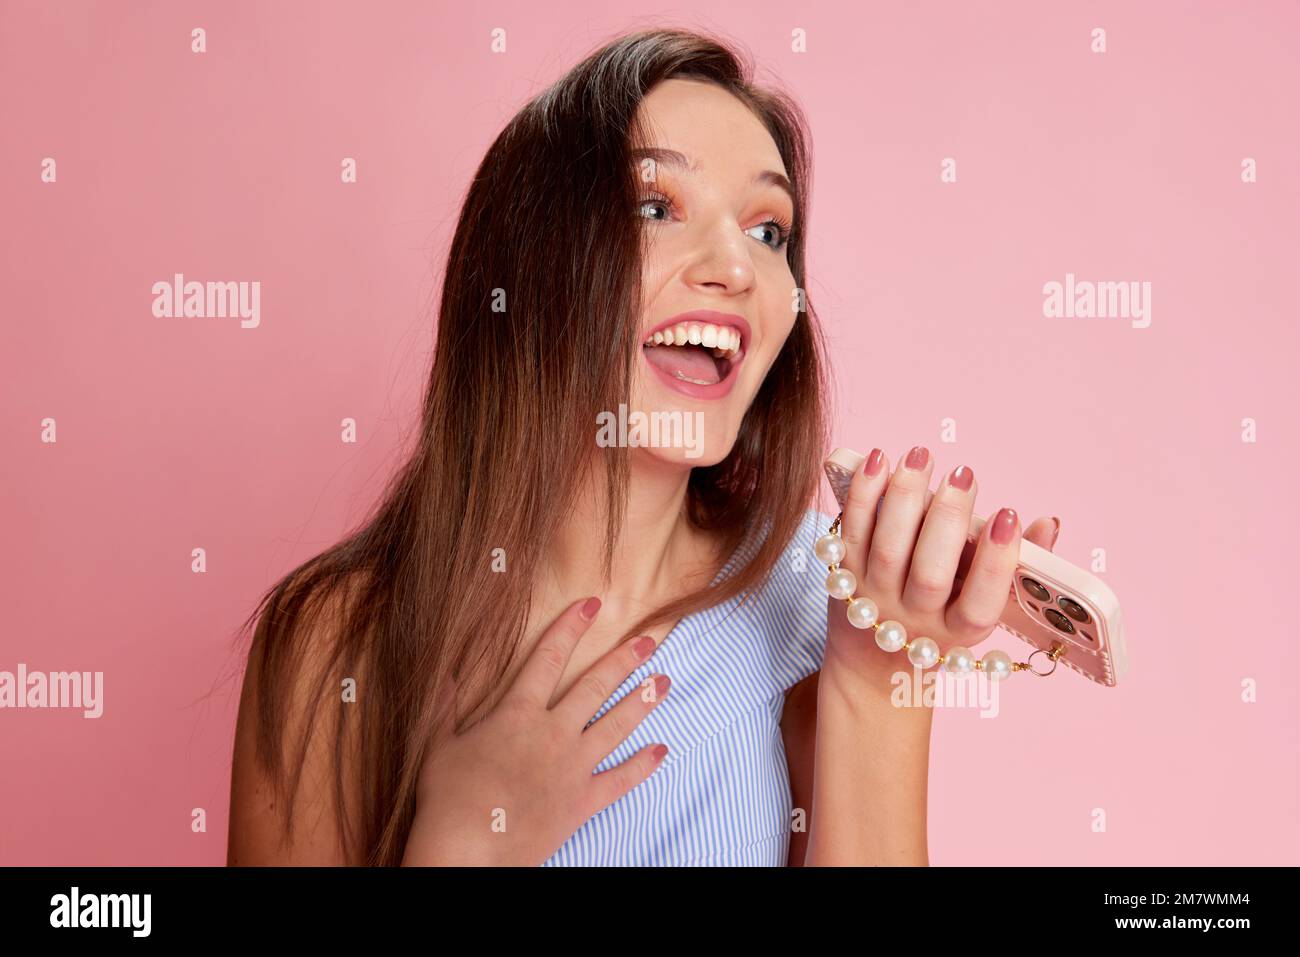 Portrait of young emotive girl posing, emotionally talking on phone over pink studio background. Communication. Concept of emotions, lifestyle, youth Stock Photo